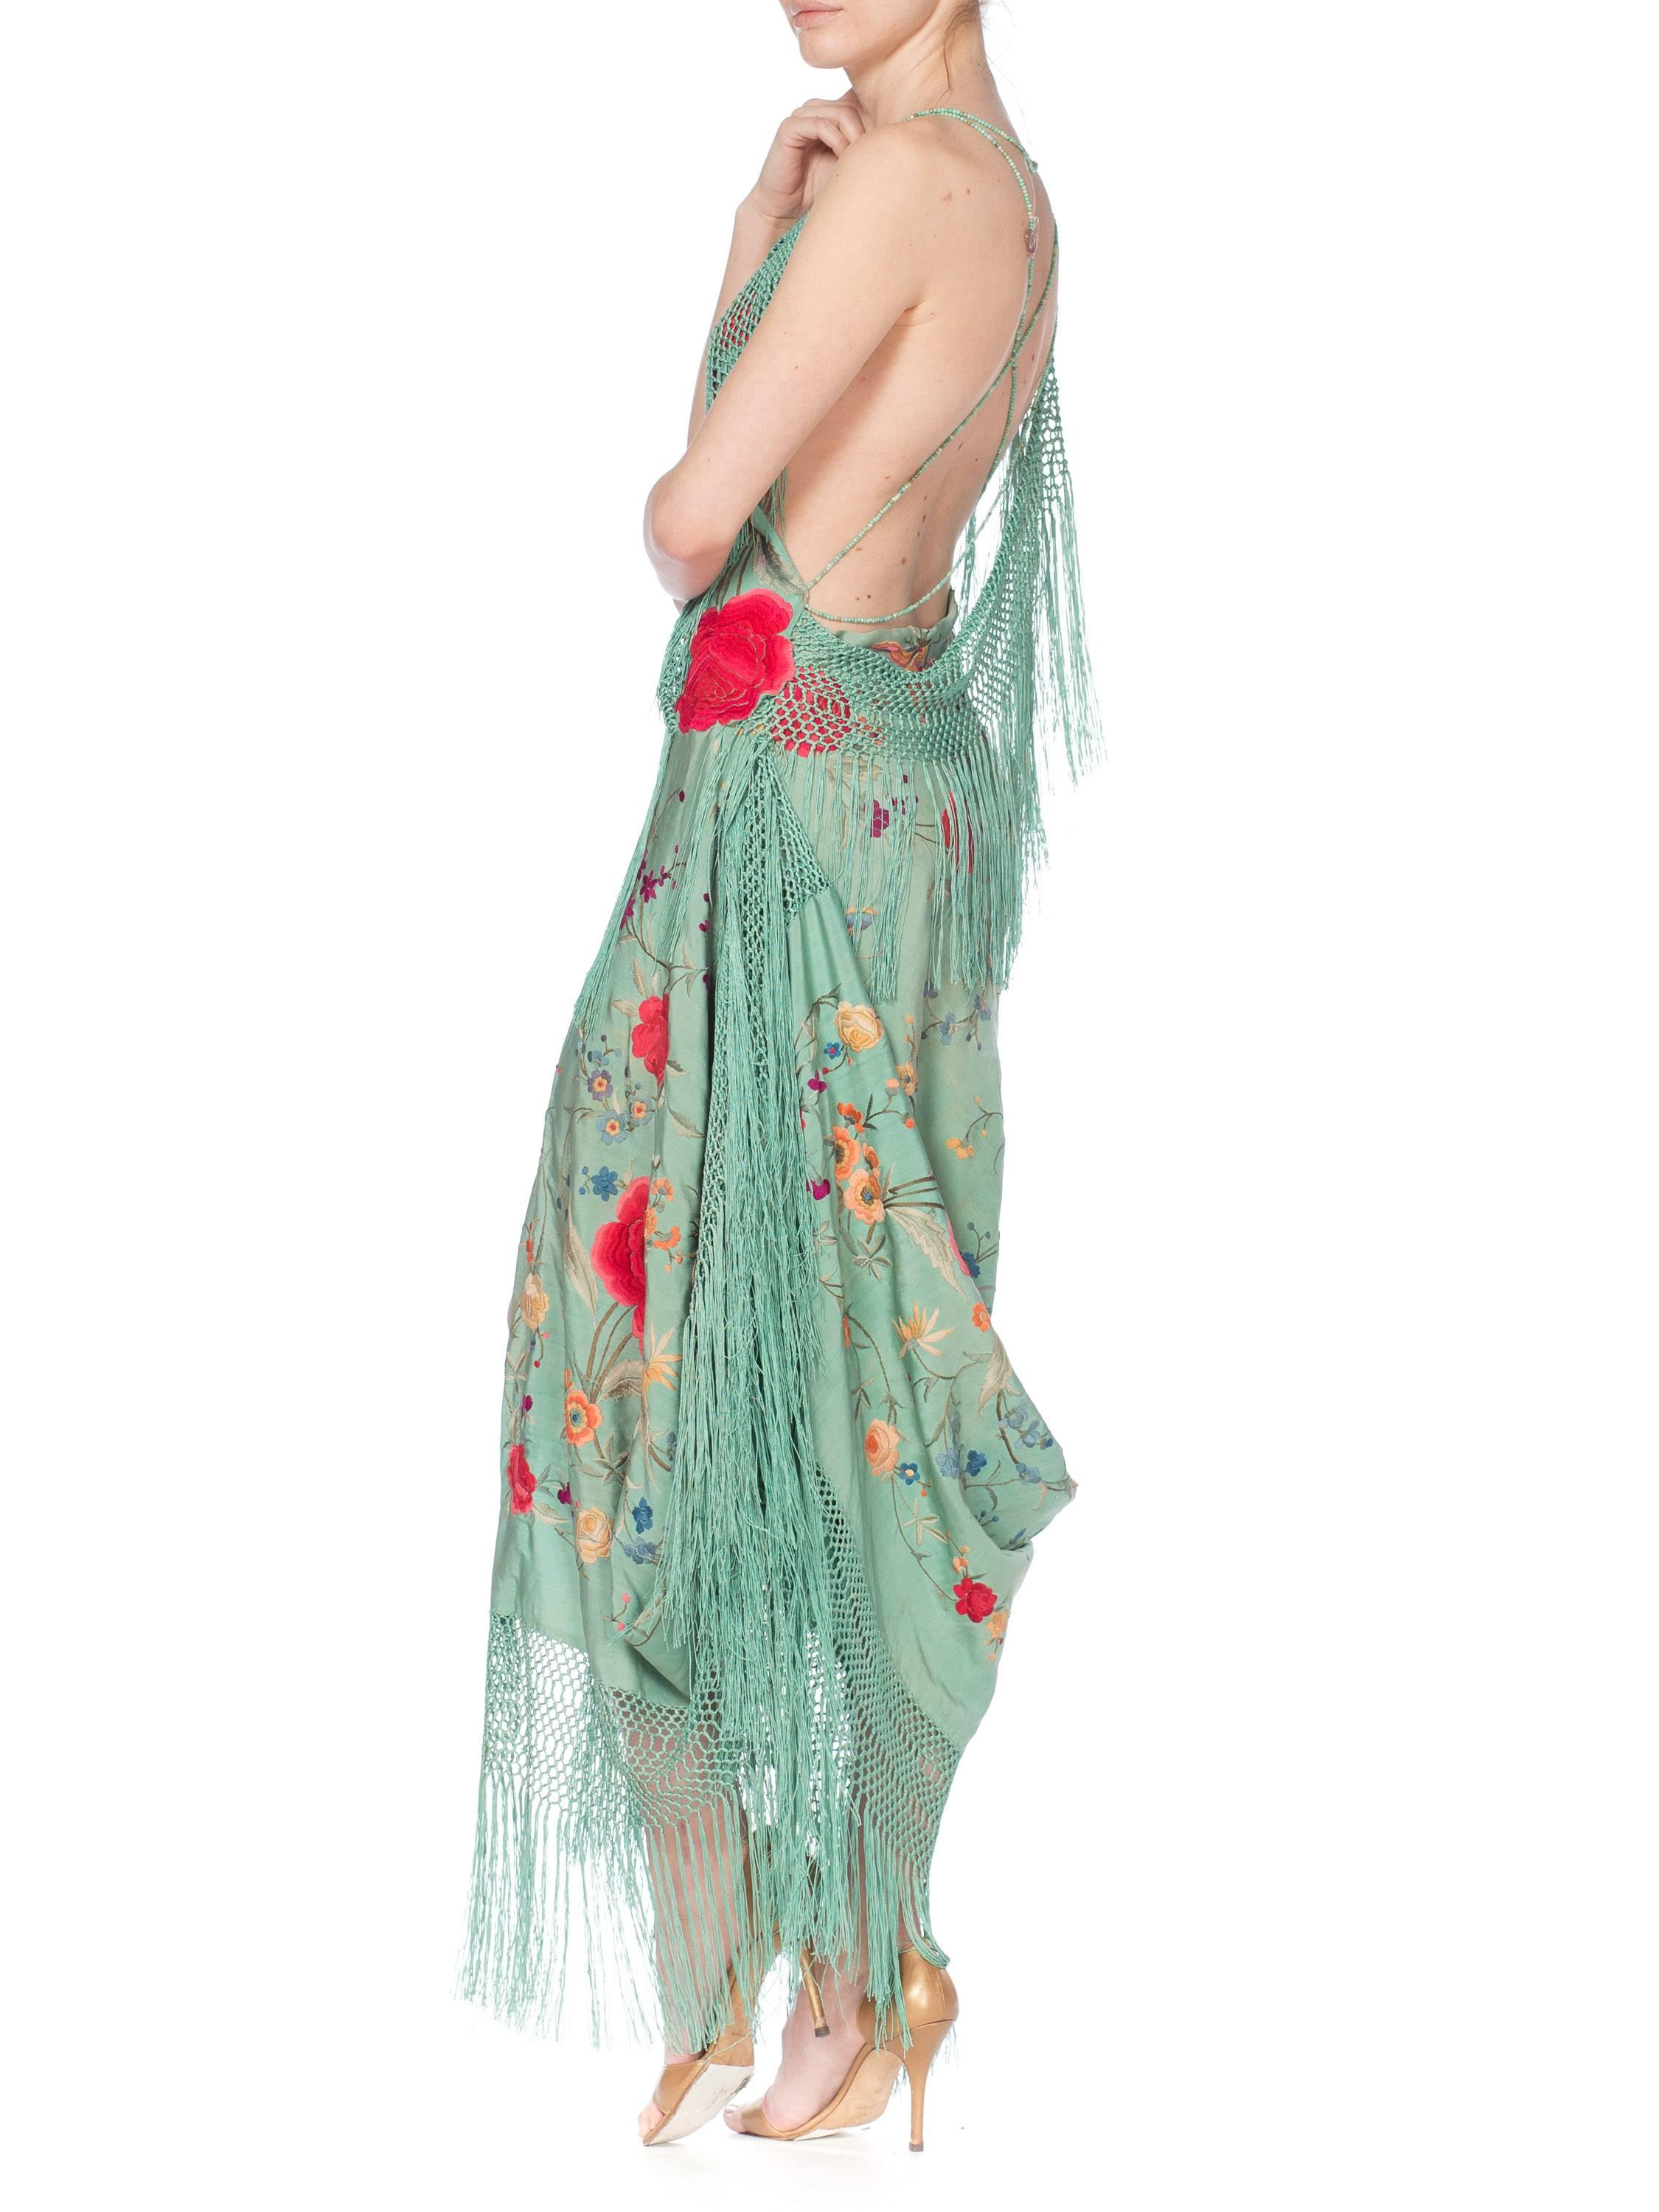 Morphew Collection Jade Piano Shawl Backless Dress with Fringe Train, 1920s  6